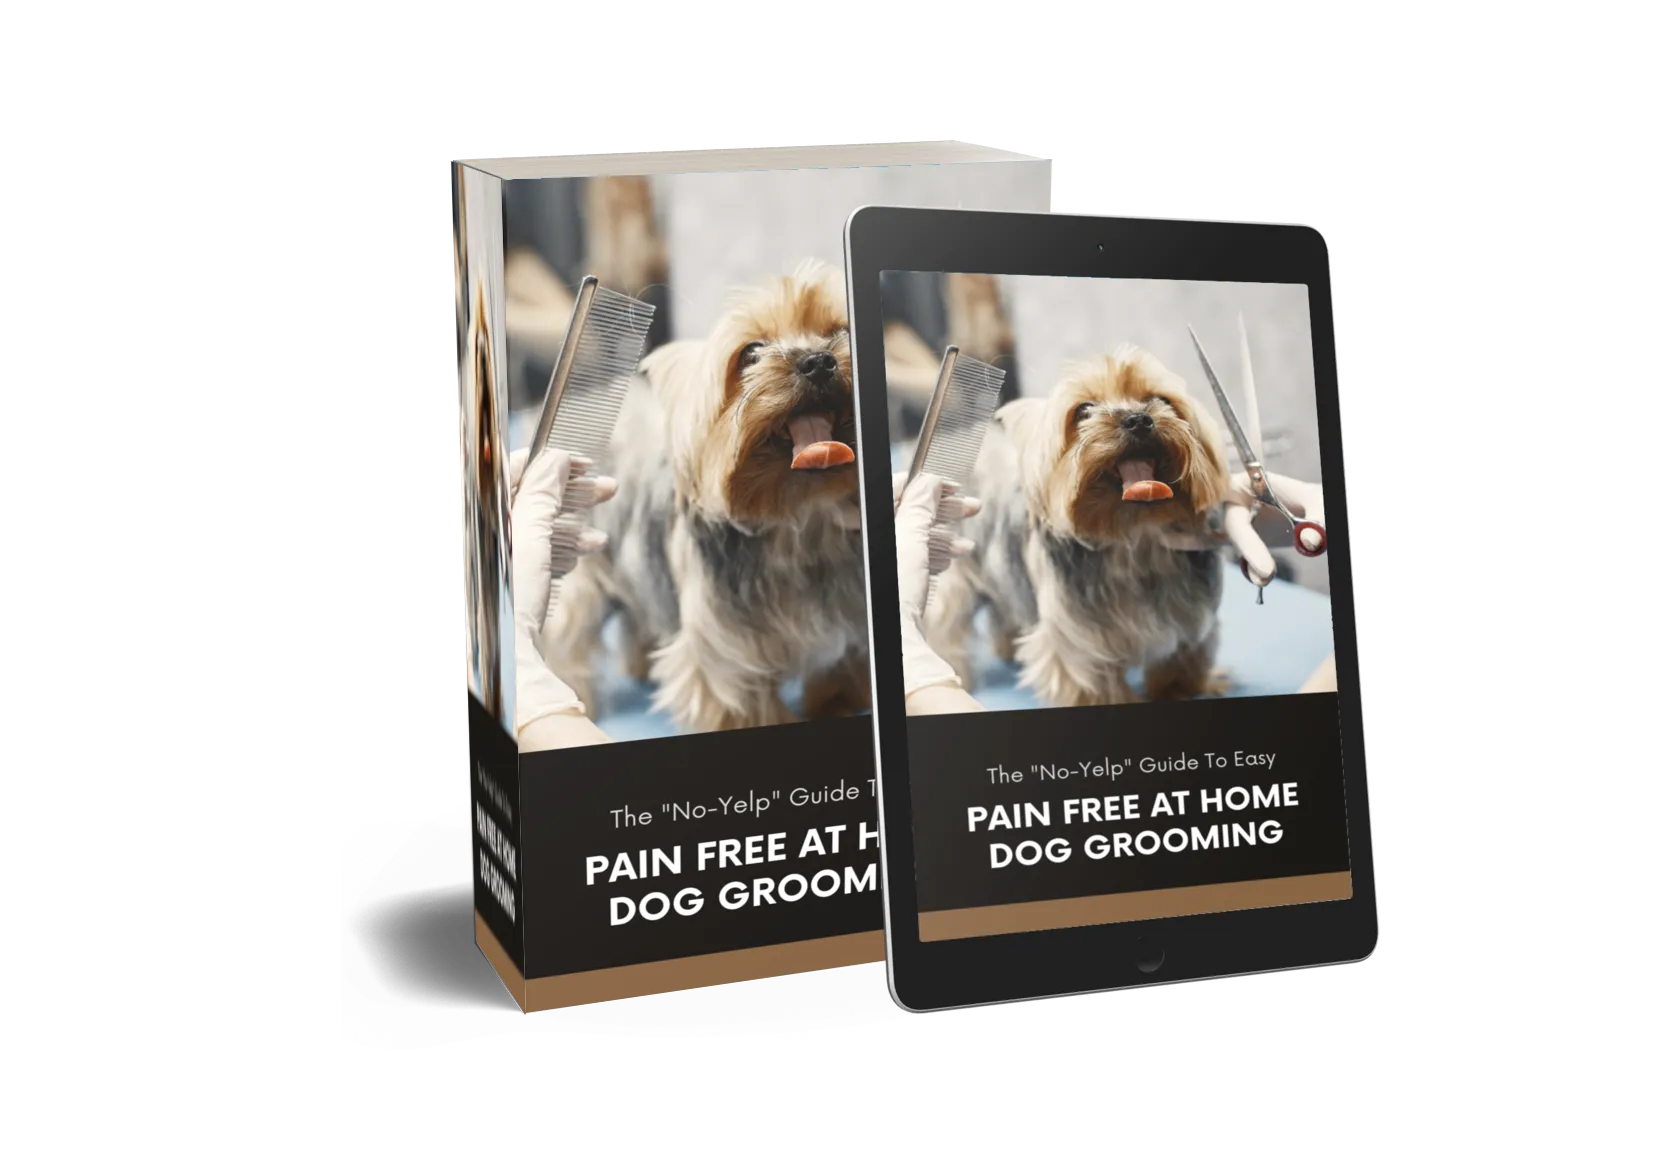 The "No-Yelp" Guide To Easy, Pain Free At Home Dog Grooming